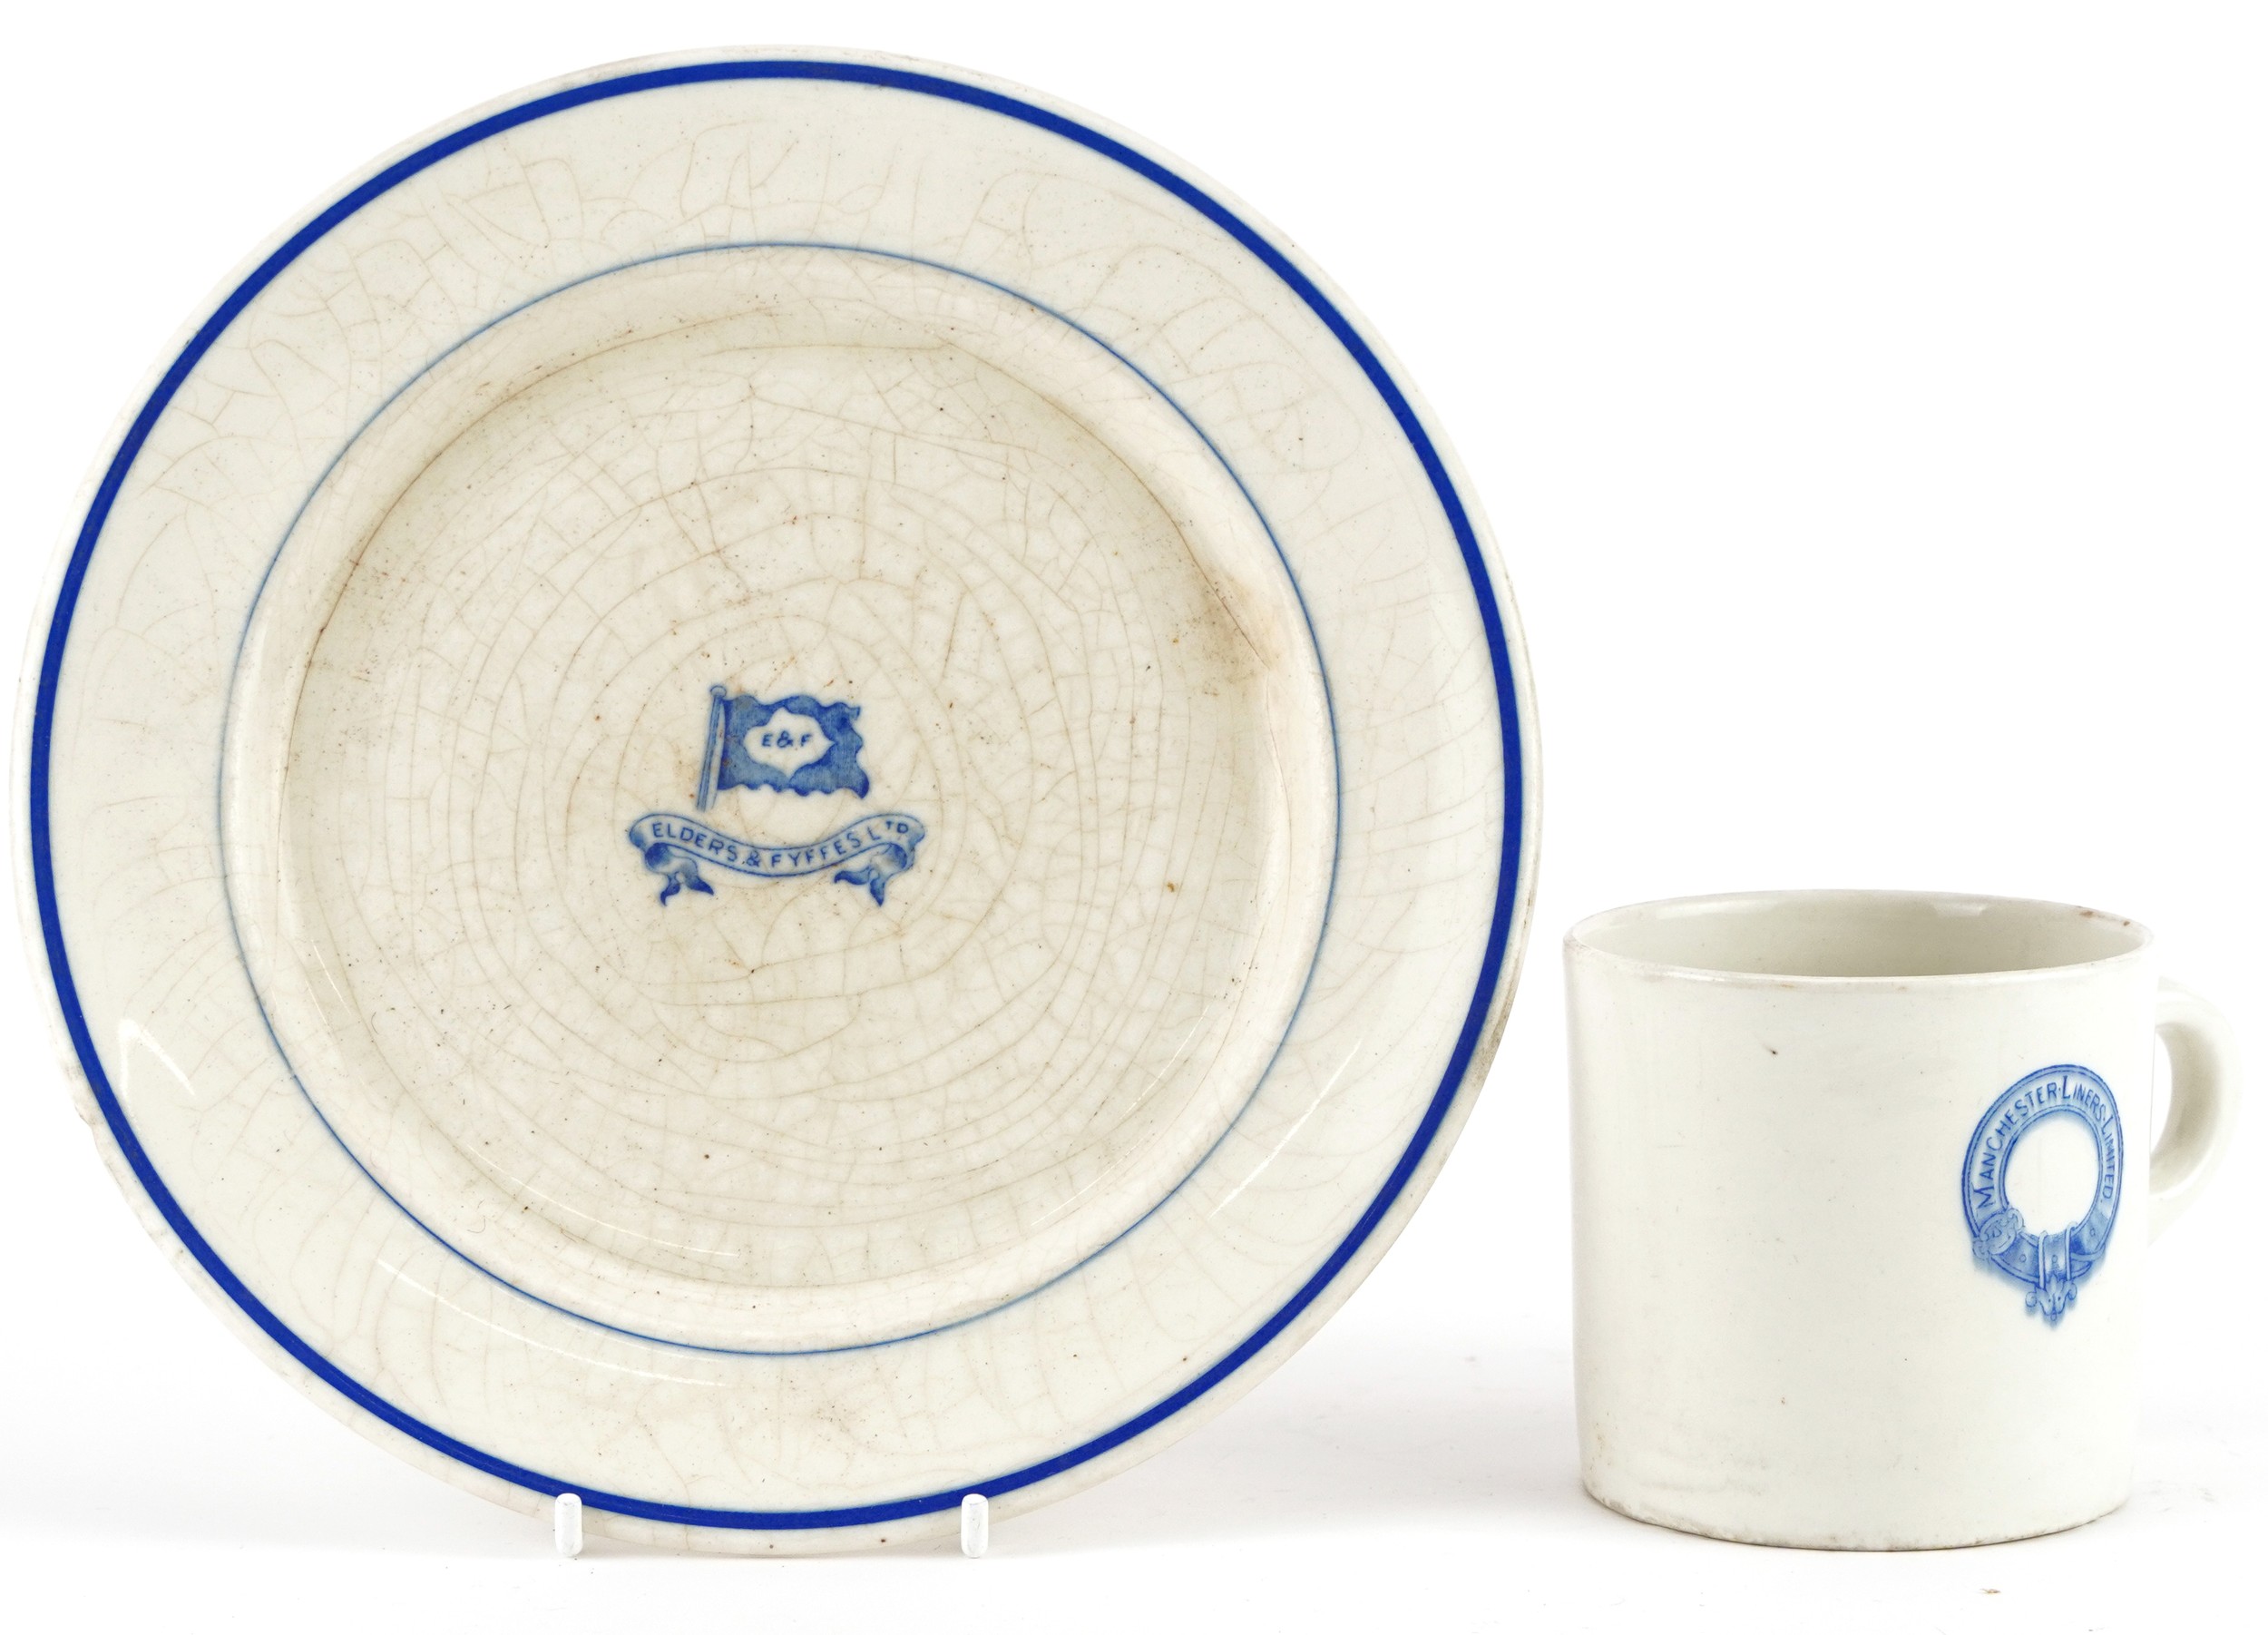 Shipping interest dinnerware comprising Manchester Liners Limited mug and Elders & Fyffes plate, the